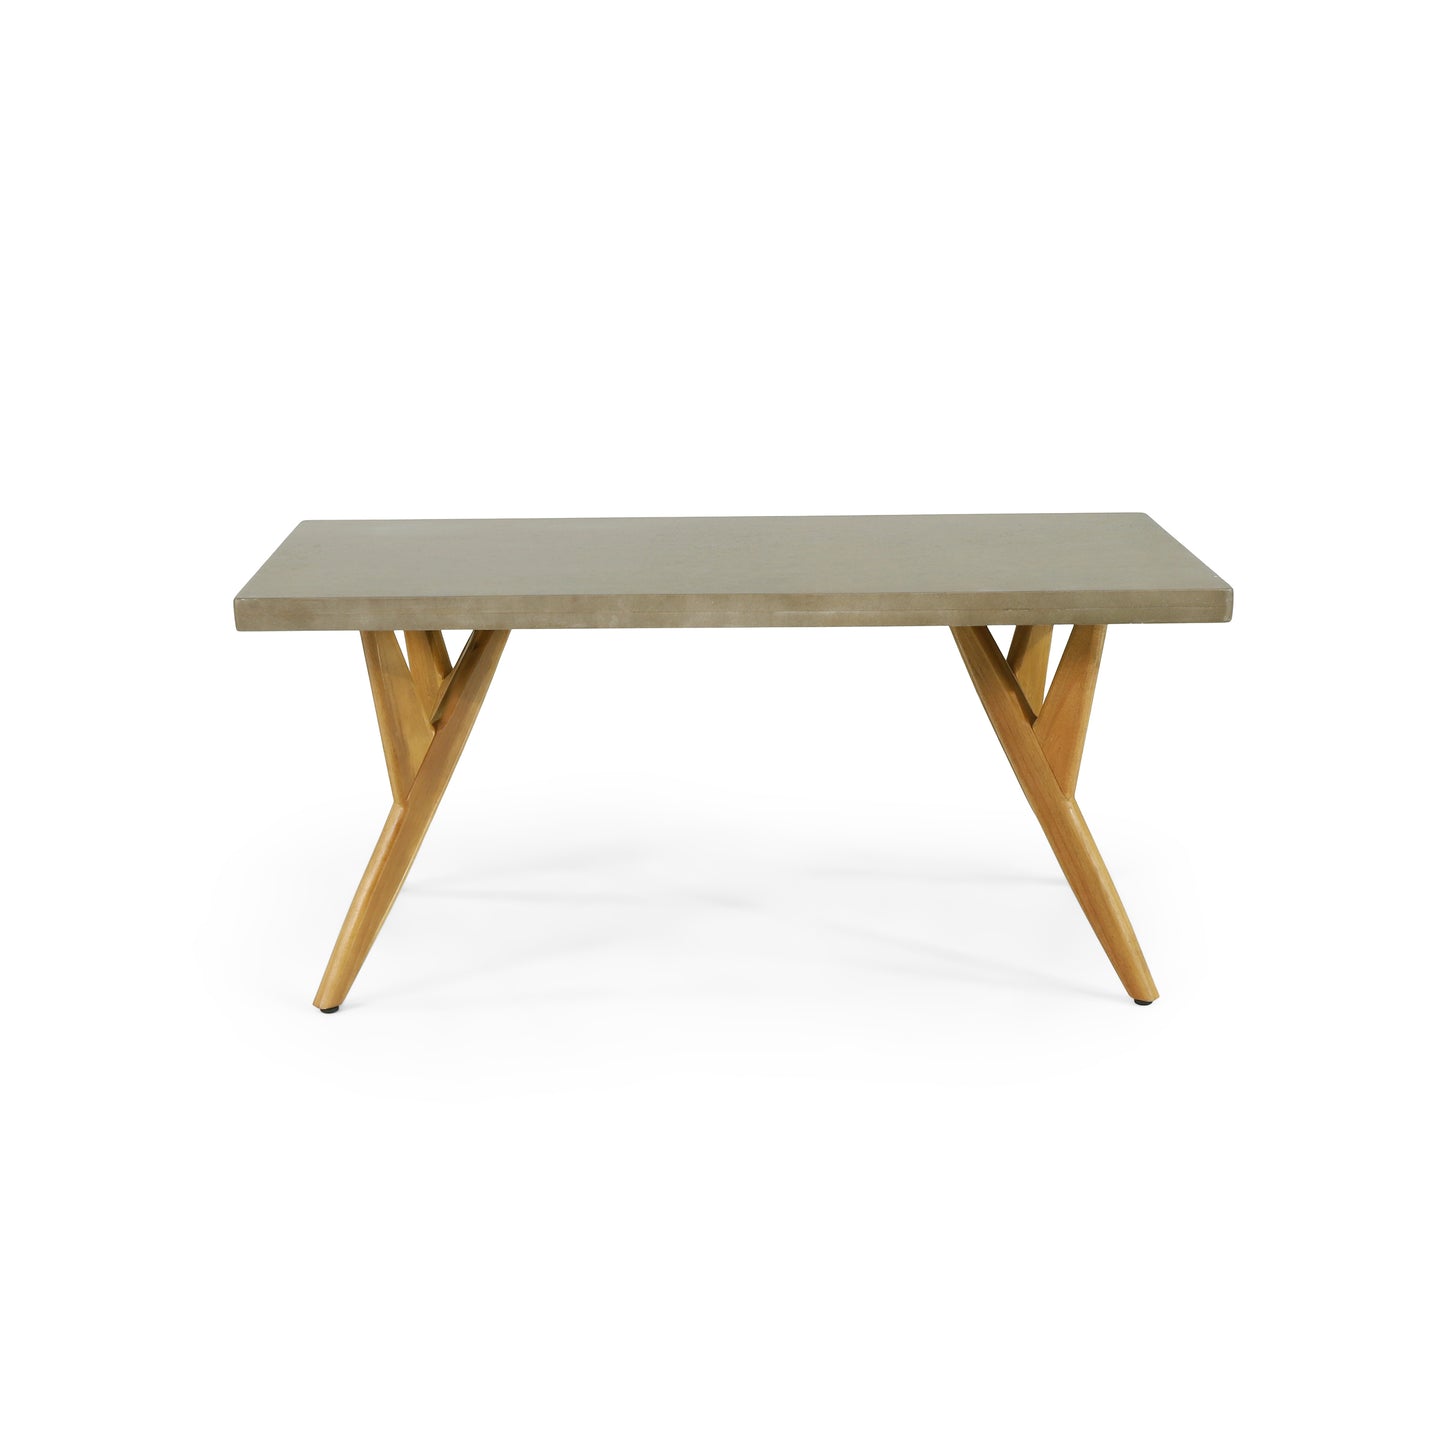 Loverin Outdoor Acacia Wood and Cast Stone Coffee Table, Teak and Light Gray